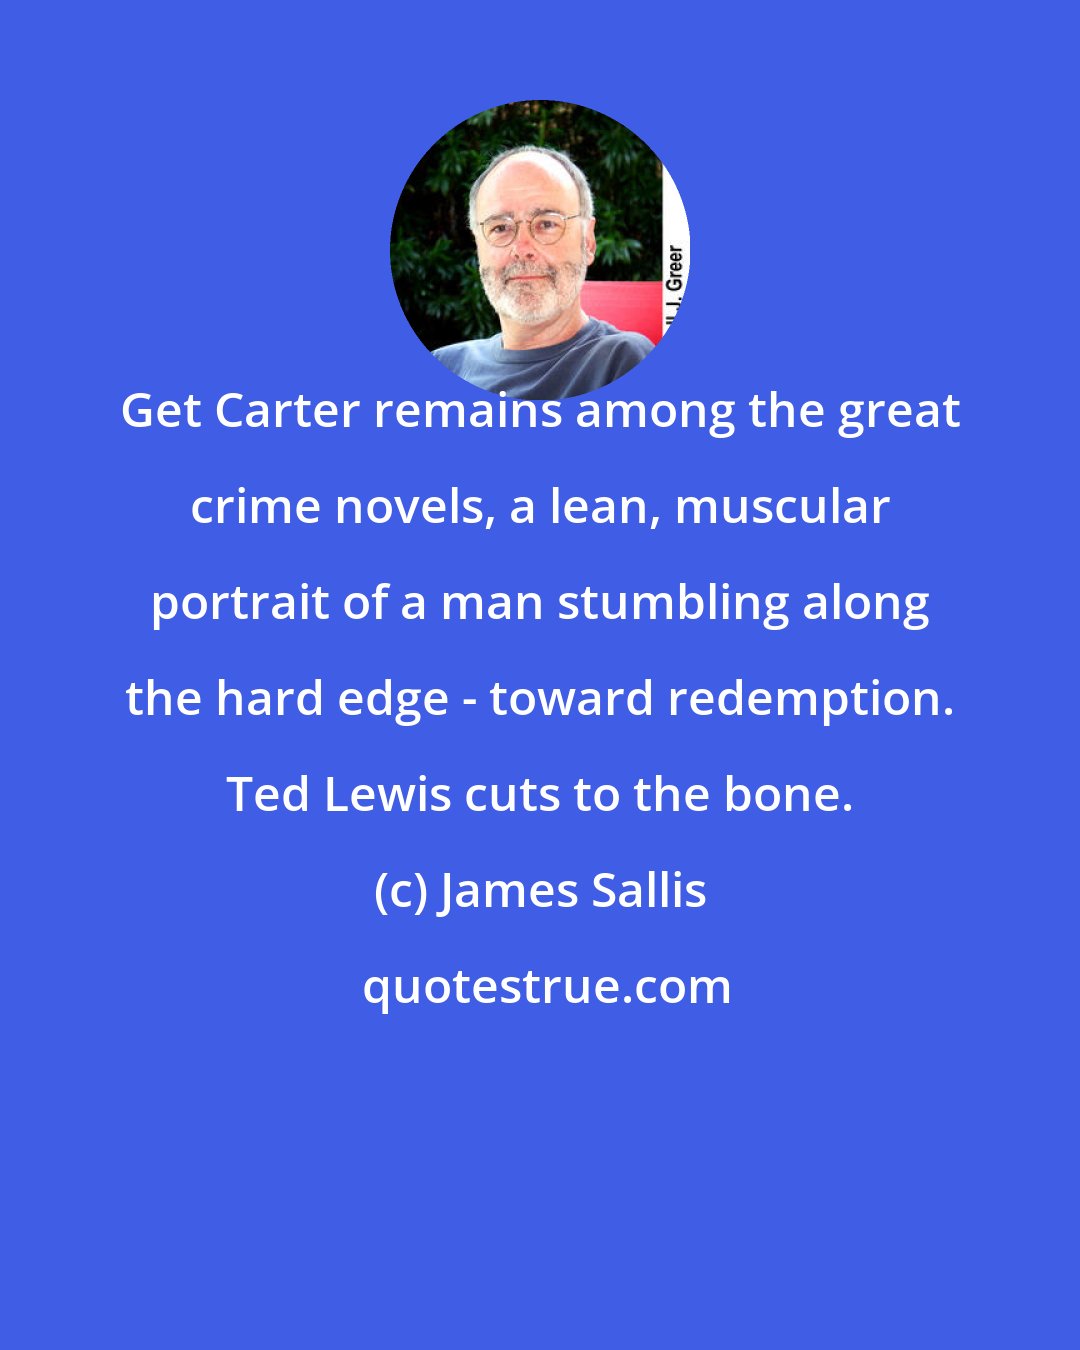 James Sallis: Get Carter remains among the great crime novels, a lean, muscular portrait of a man stumbling along the hard edge - toward redemption. Ted Lewis cuts to the bone.